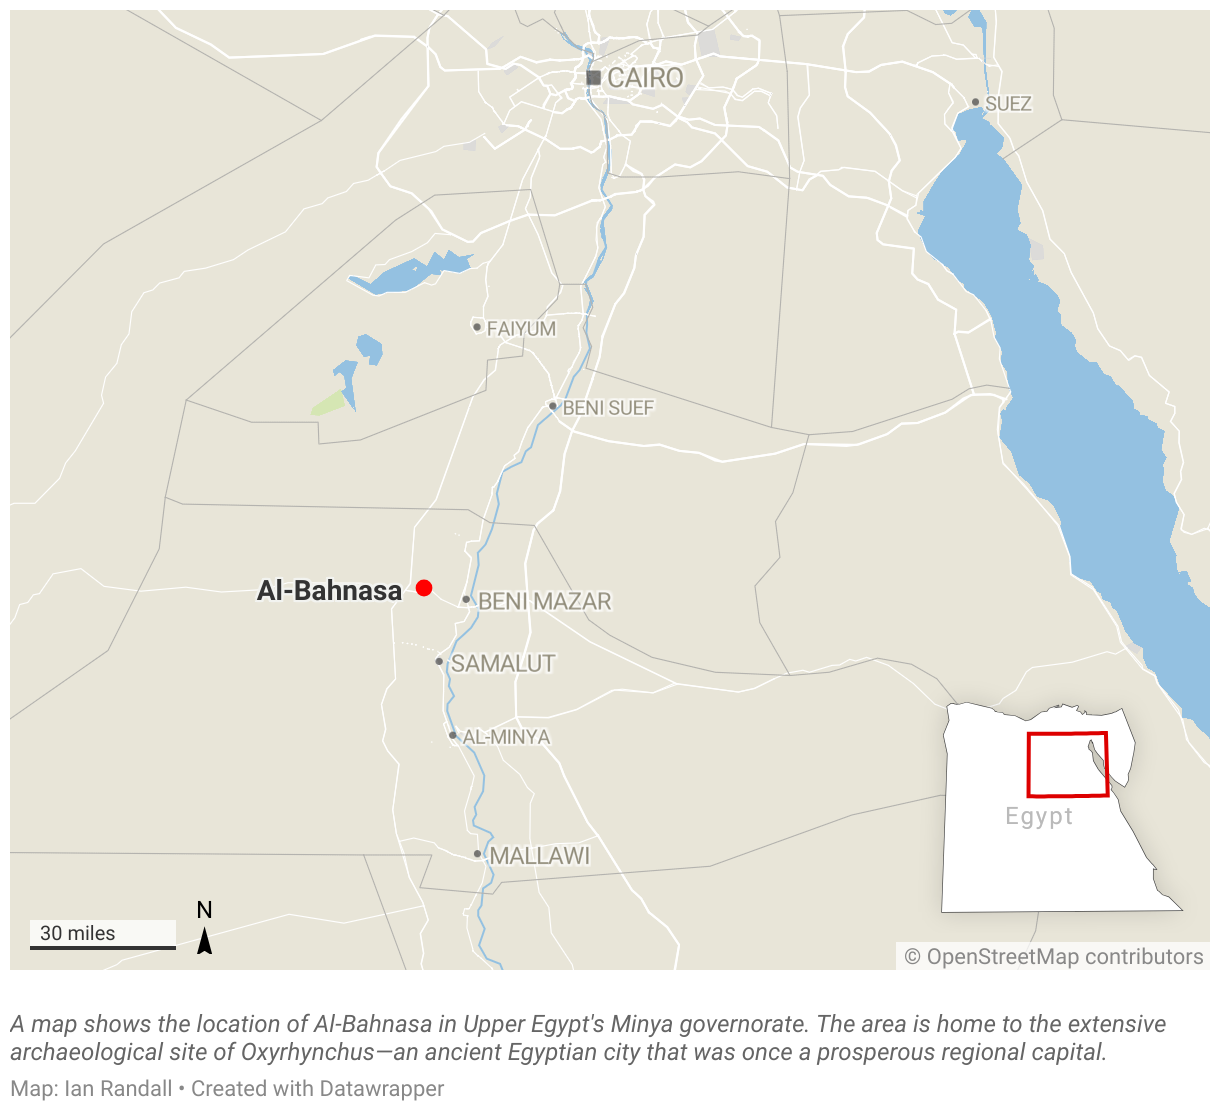 A map shows the location of Al-Bahnasa in Upper Egypt's Minya governorate.